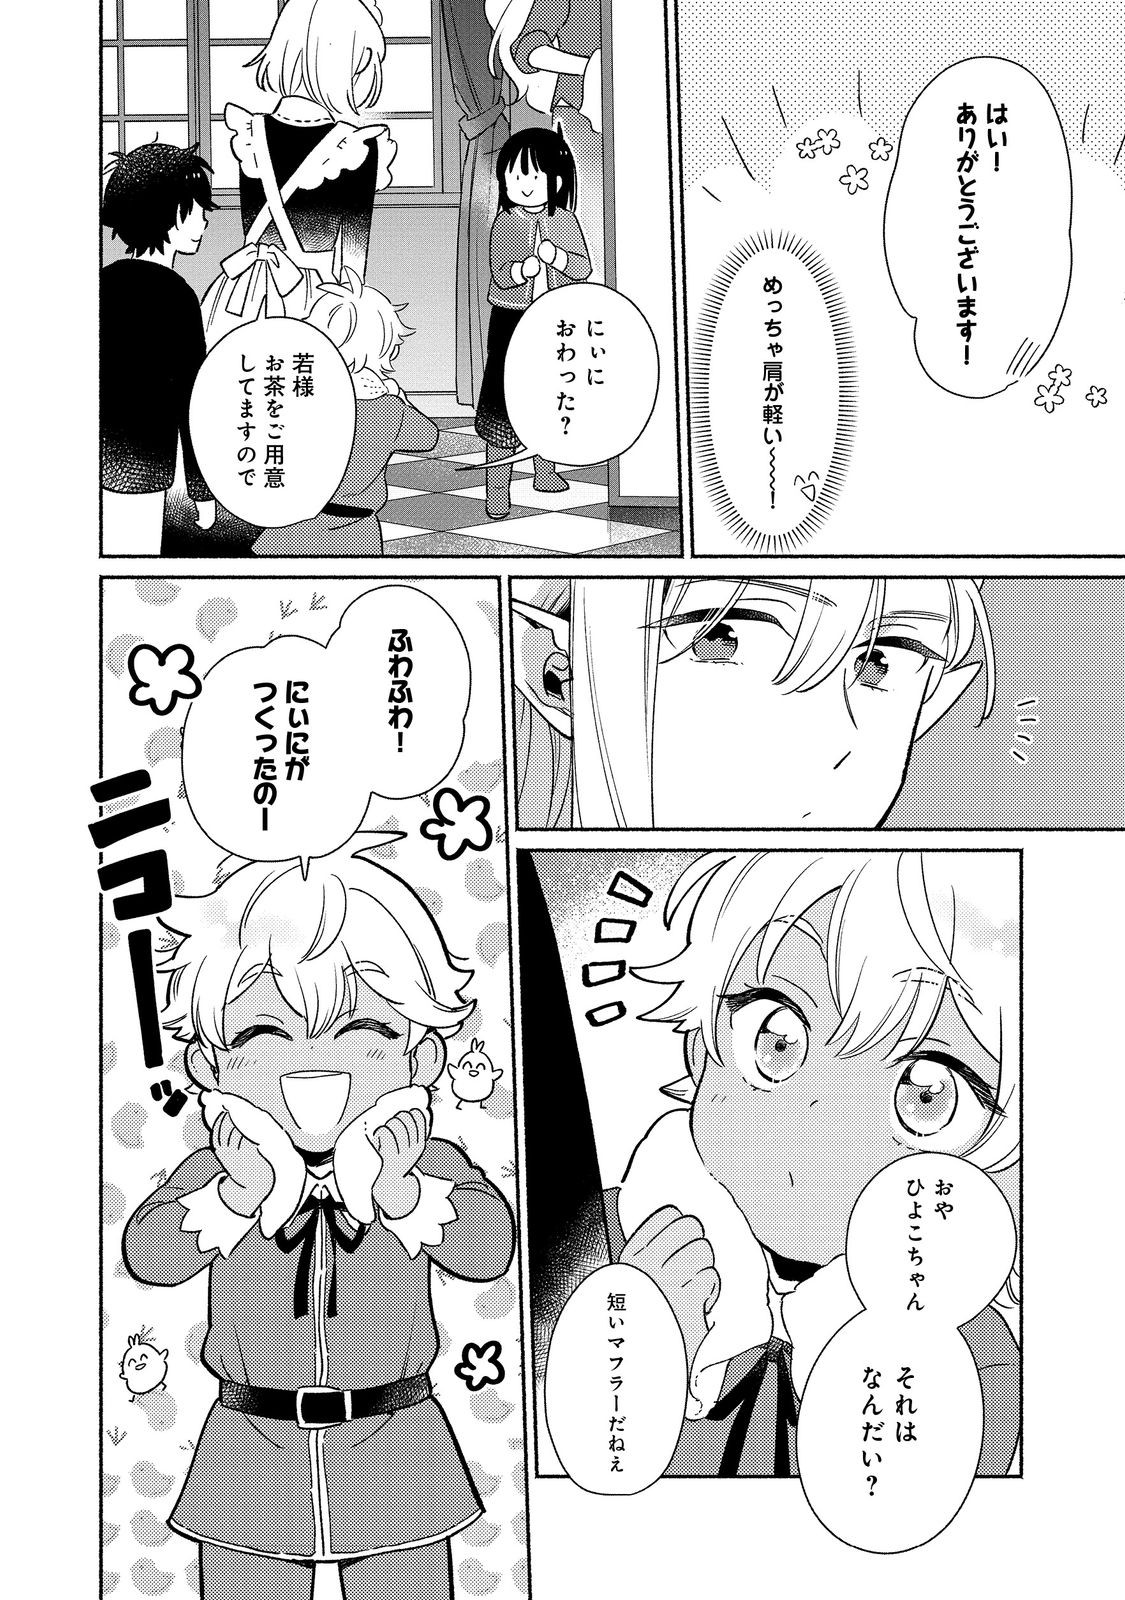 I’m the White Pig Nobleman 第20.1話 - Page 10